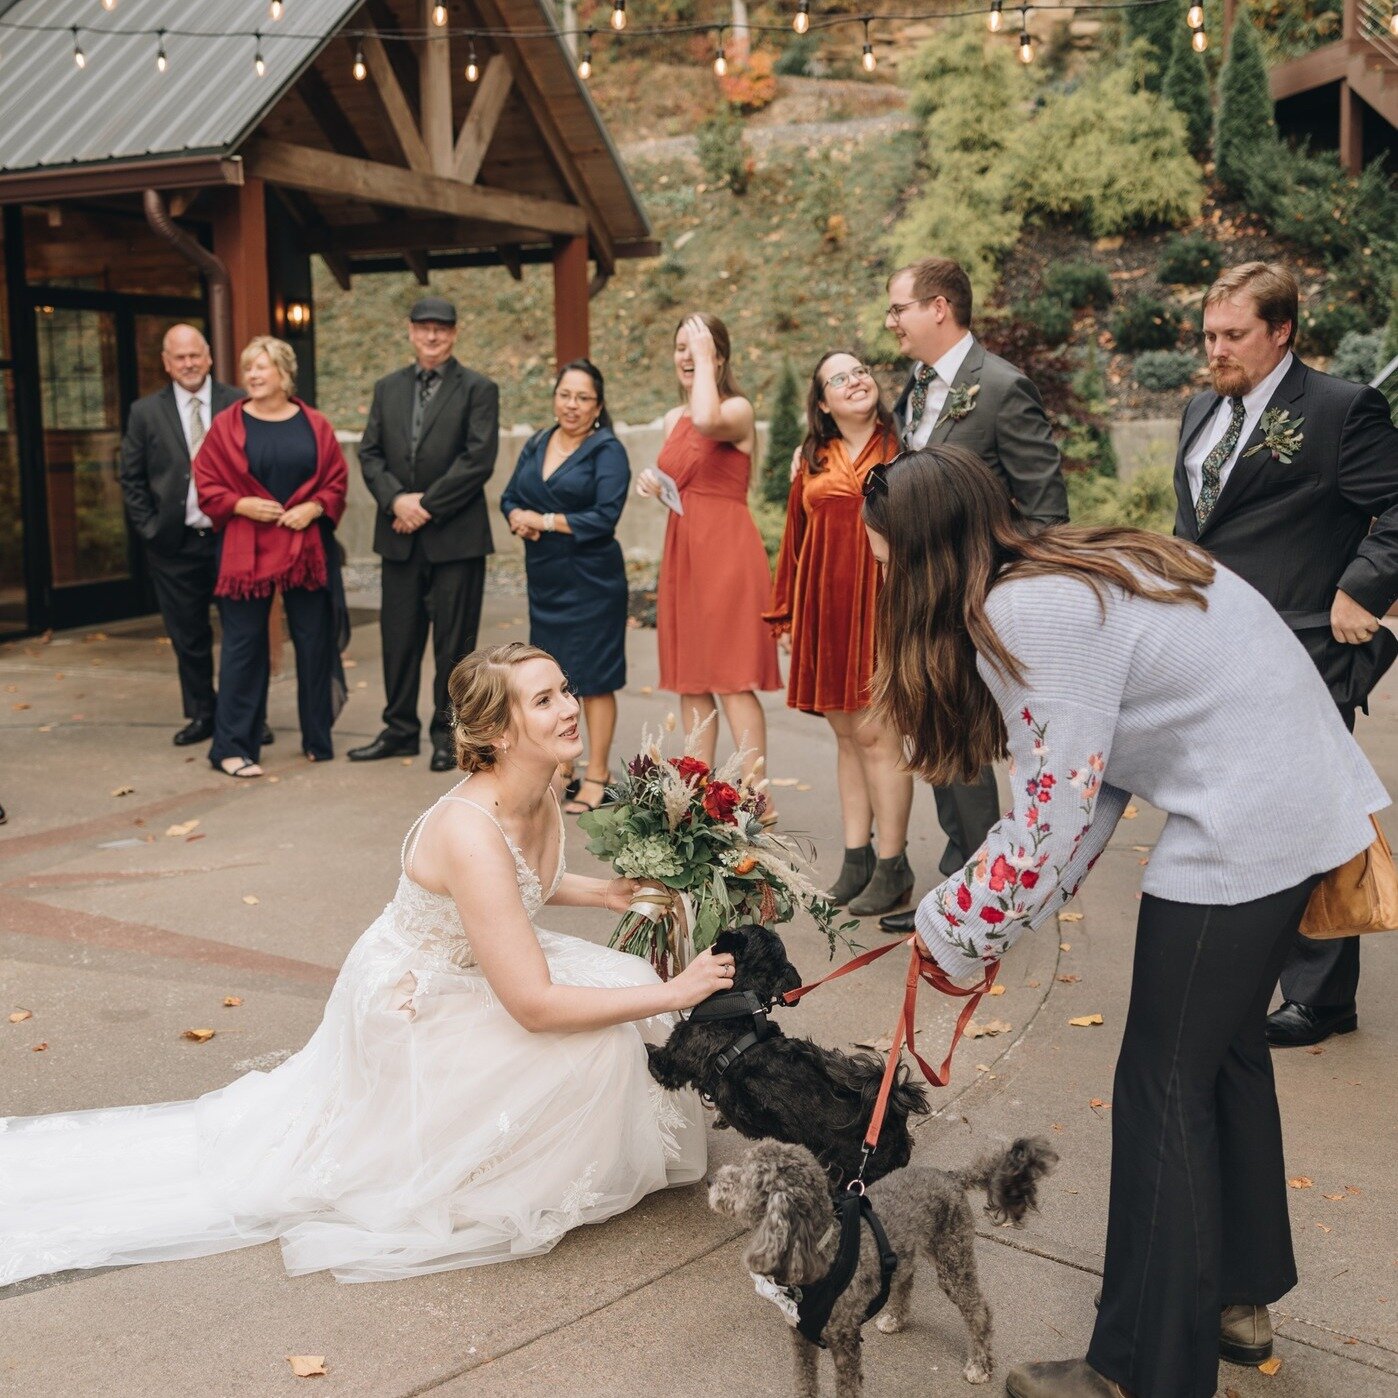 💖 Wedding season is upon us! 💖

Did you know that we offer wedding &amp; elopement pet care services? 

Say goodbye to the stress and hassle of finding a reliable pet sitter or worrying about your pup's well-being on your special day. Our professio